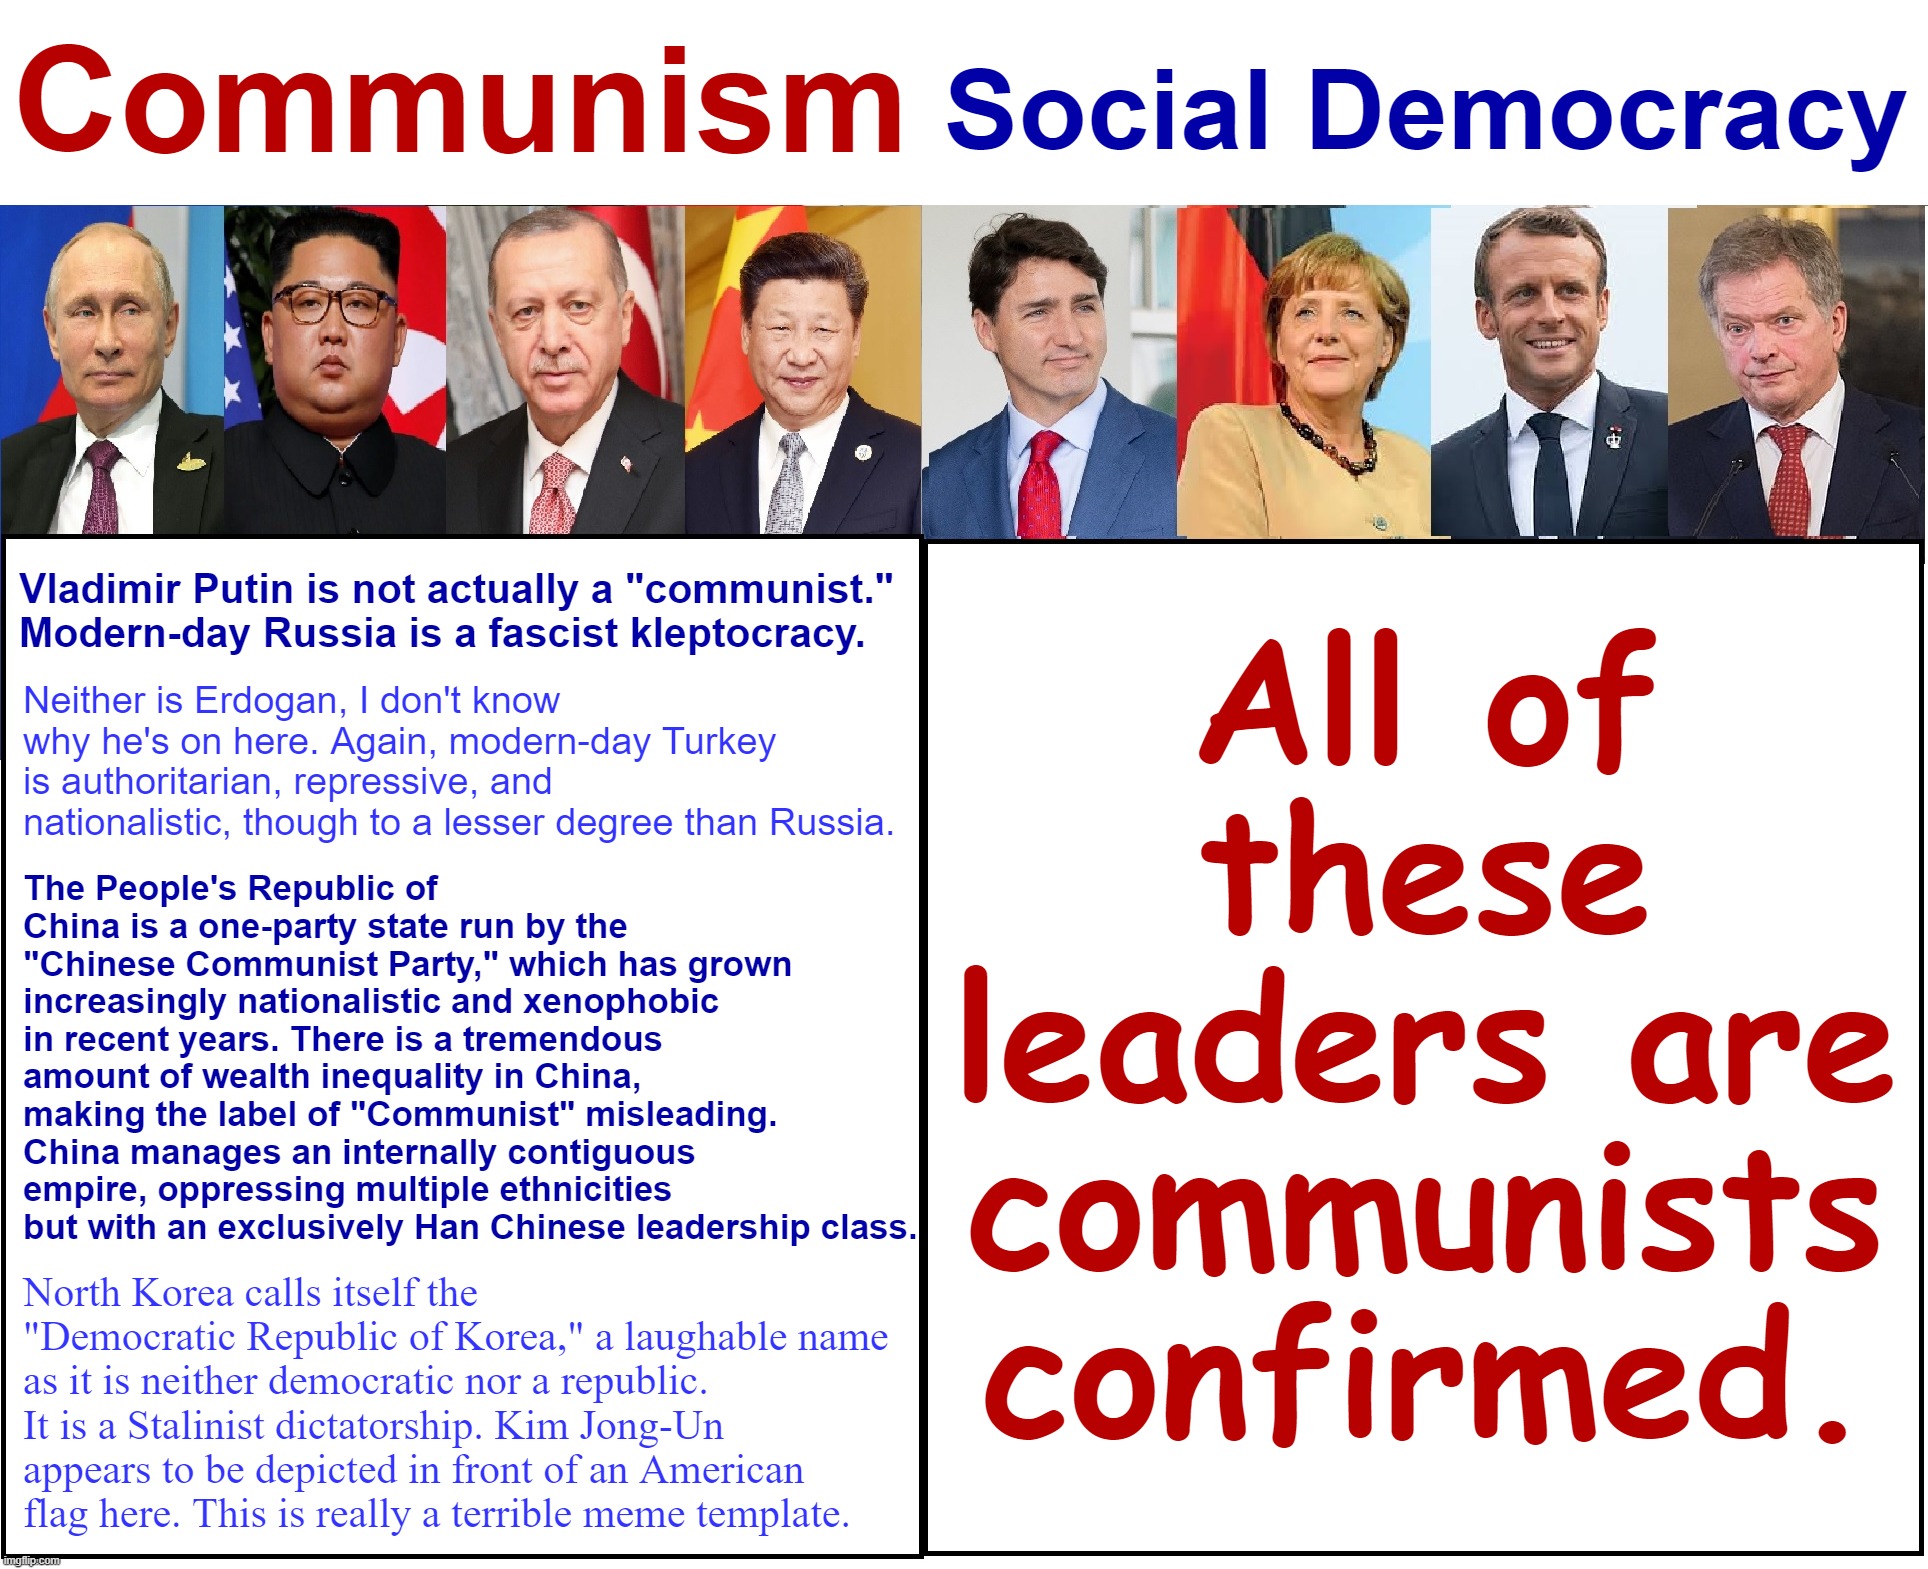 Contemporary comparative politics with Interim President Slobama. | Communism; Social Democracy; All of these leaders are communists confirmed. Vladimir Putin is not actually a "communist." Modern-day Russia is a fascist kleptocracy. Neither is Erdogan, I don't know why he's on here. Again, modern-day Turkey is authoritarian, repressive, and nationalistic, though to a lesser degree than Russia. The People's Republic of China is a one-party state run by the "Chinese Communist Party," which has grown increasingly nationalistic and xenophobic in recent years. There is a tremendous amount of wealth inequality in China, making the label of "Communist" misleading. China manages an internally contiguous empire, oppressing multiple ethnicities but with an exclusively Han Chinese leadership class. North Korea calls itself the "Democratic Republic of Korea," a laughable name as it is neither democratic nor a republic. It is a Stalinist dictatorship. Kim Jong-Un appears to be depicted in front of an American flag here. This is really a terrible meme template. | image tagged in communism vs social democracy,contemporary,comparative,politics,with,interim president slobama | made w/ Imgflip meme maker